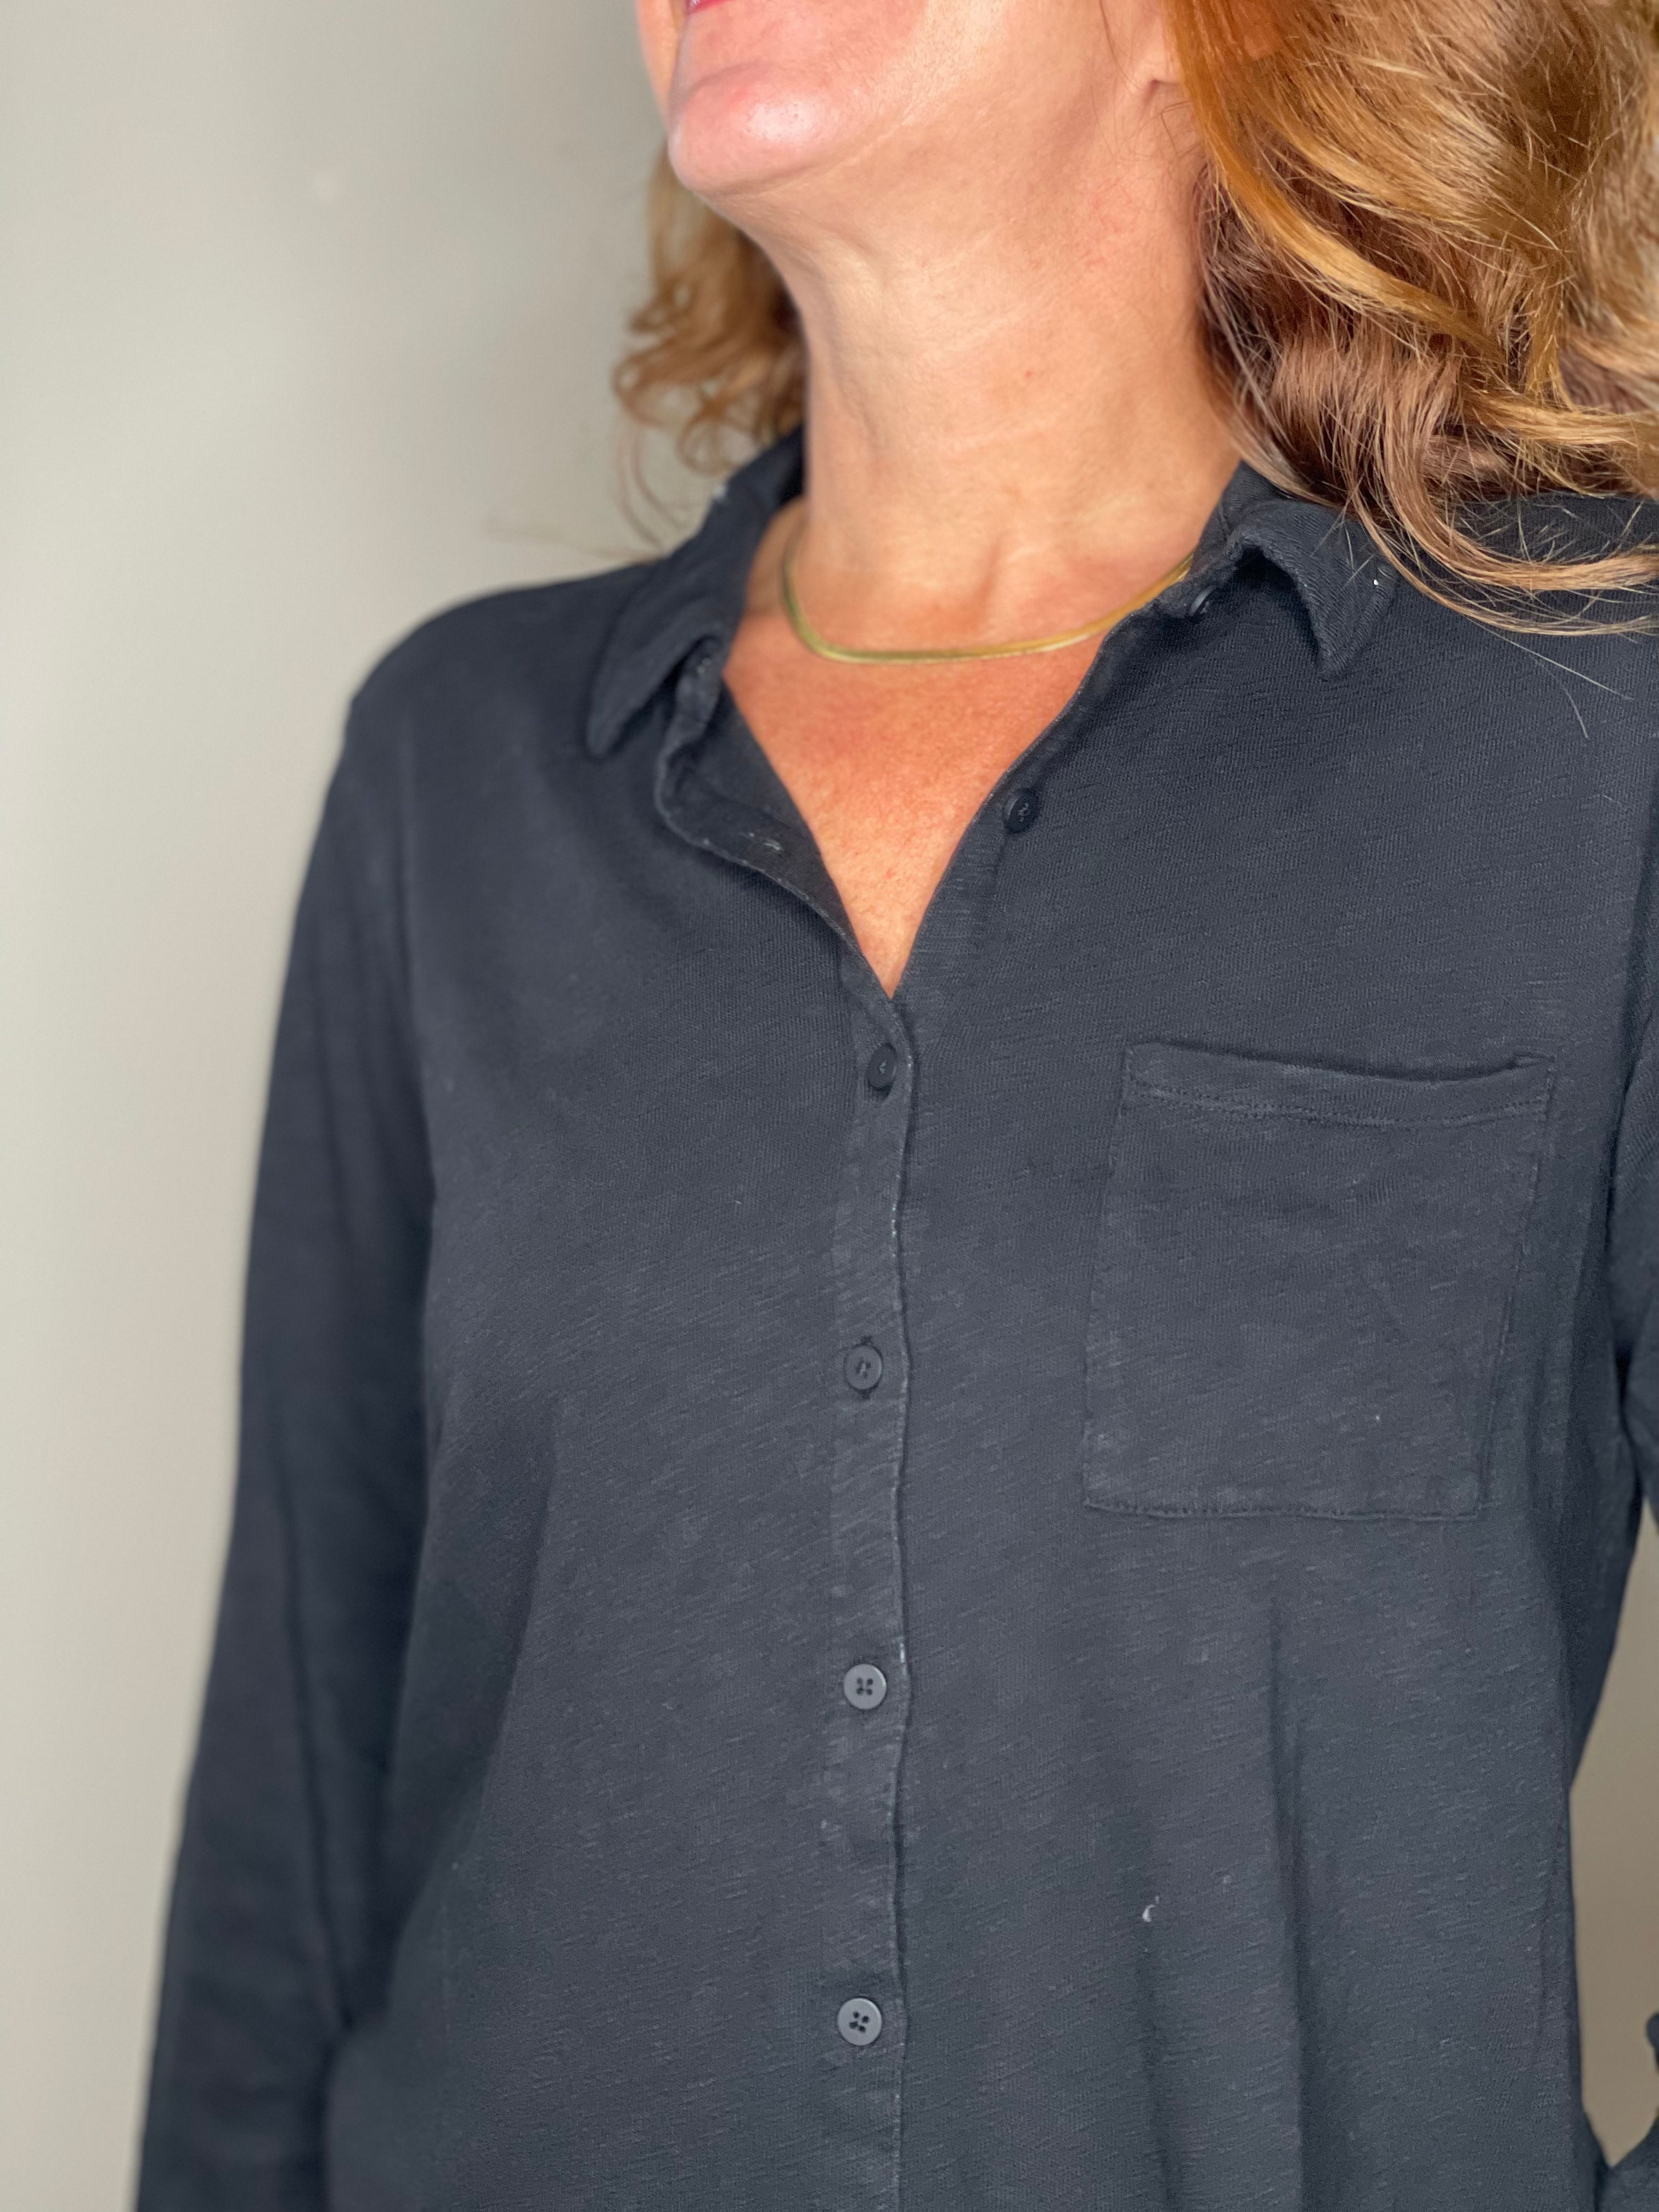 Hello Nite Perfectly Soft Button Up Shirt in Black.